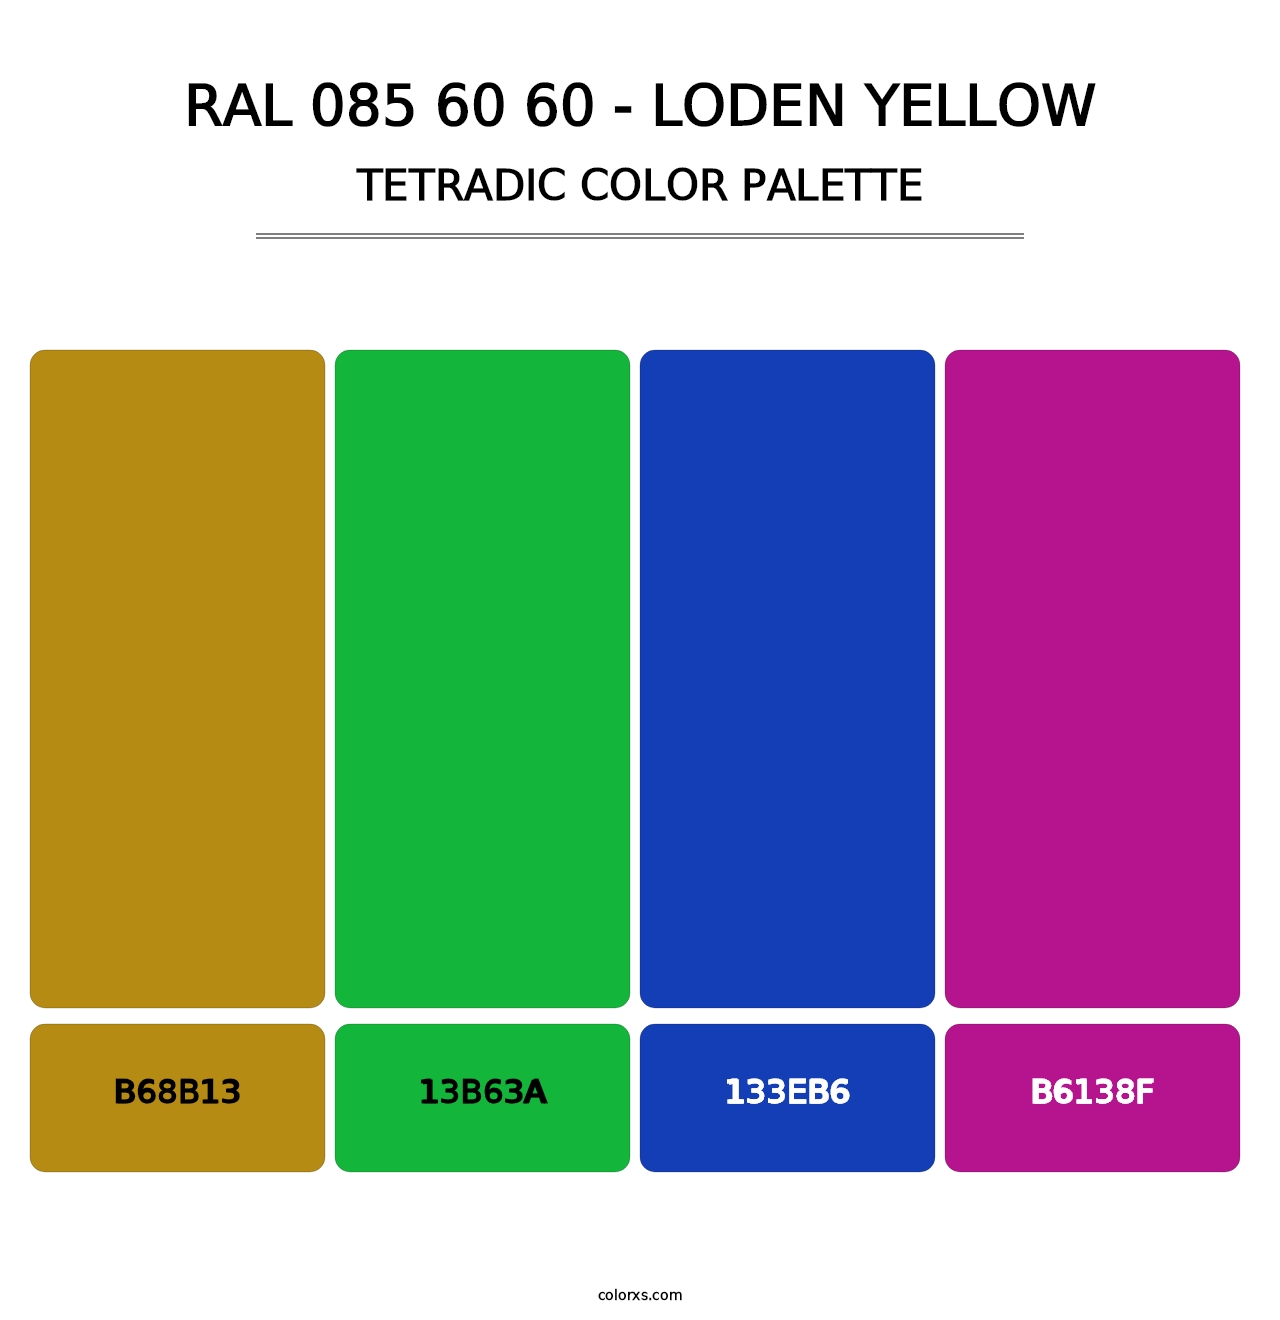 RAL 085 60 60 - Loden Yellow - Tetradic Color Palette